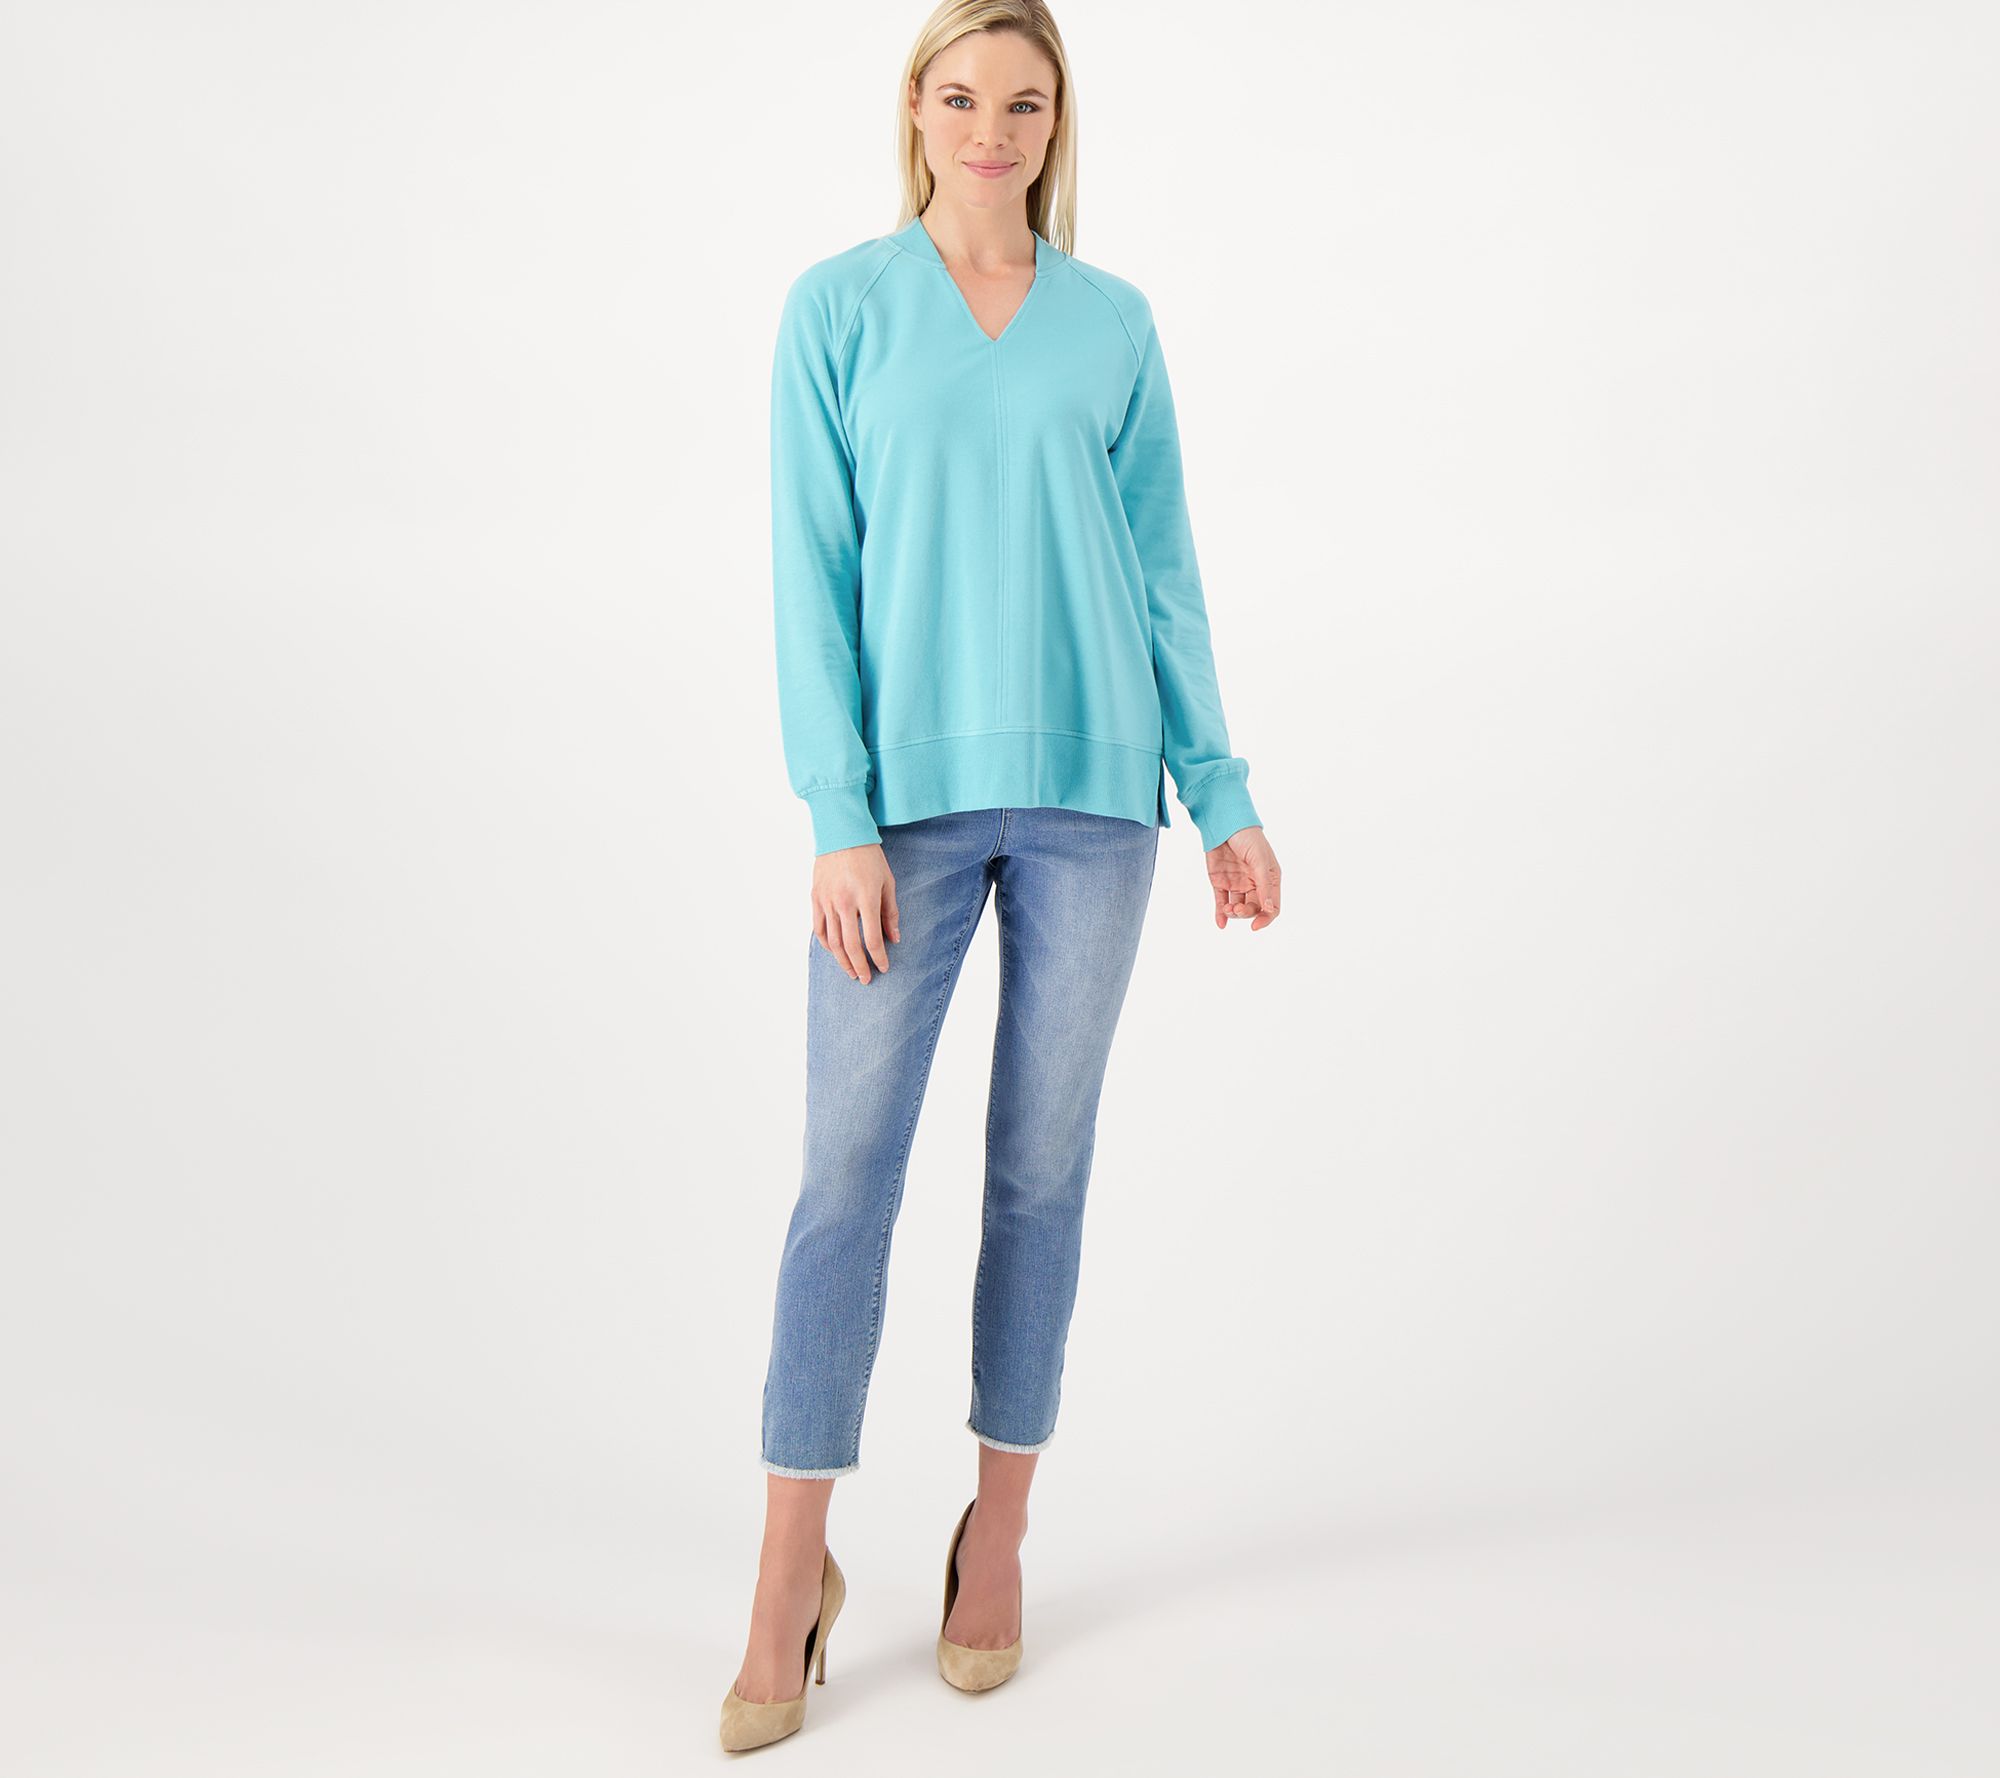 Belle Body by Kim Gravel TripleLuxe French Terry V-Neck Top - QVC.com